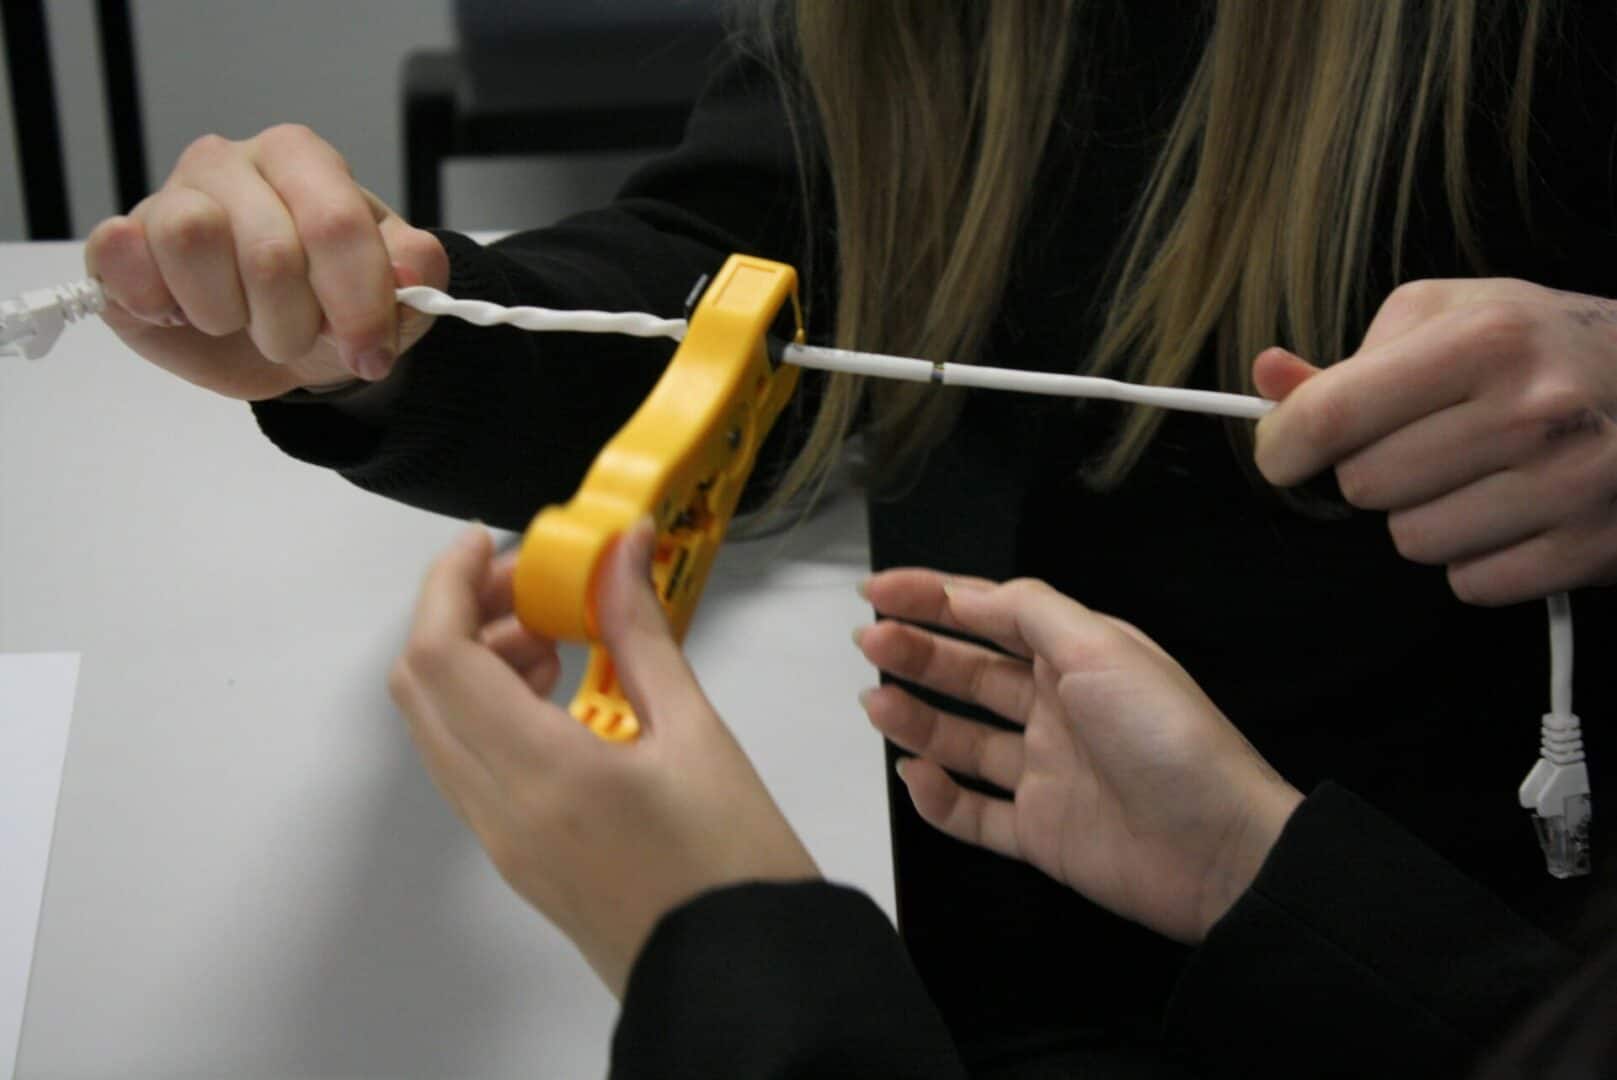 students tap into communications with cable cutters